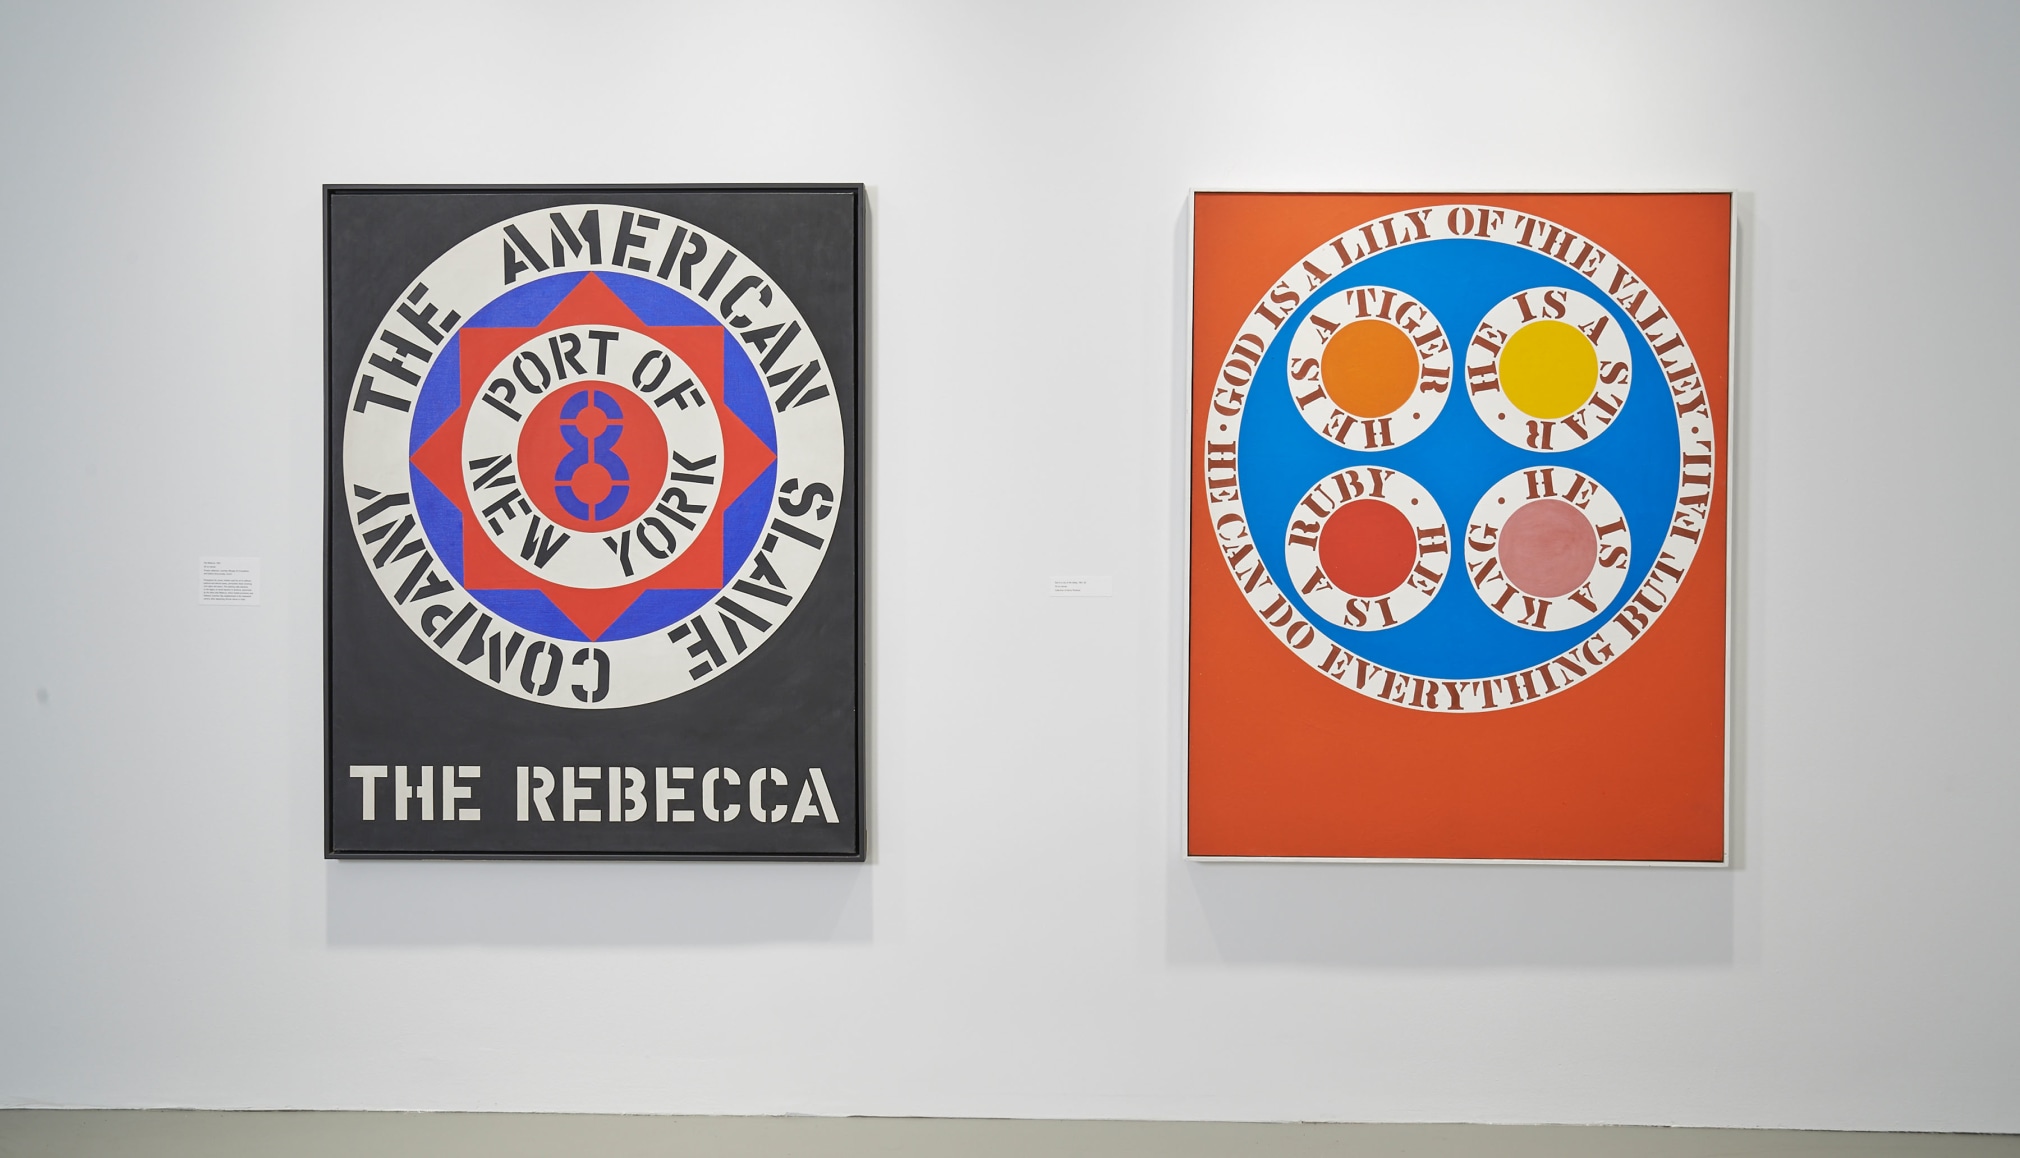 Installation view of Robert Indiana: Beyond LOVE, Whitney Museum of American Art, New York, September 26, 2013&ndash;January 5, 2014. Left to right, The Rebecca (1962) and God Is a Lily of the Valley (1961&ndash;62). Photo: Tom Powel Imaging